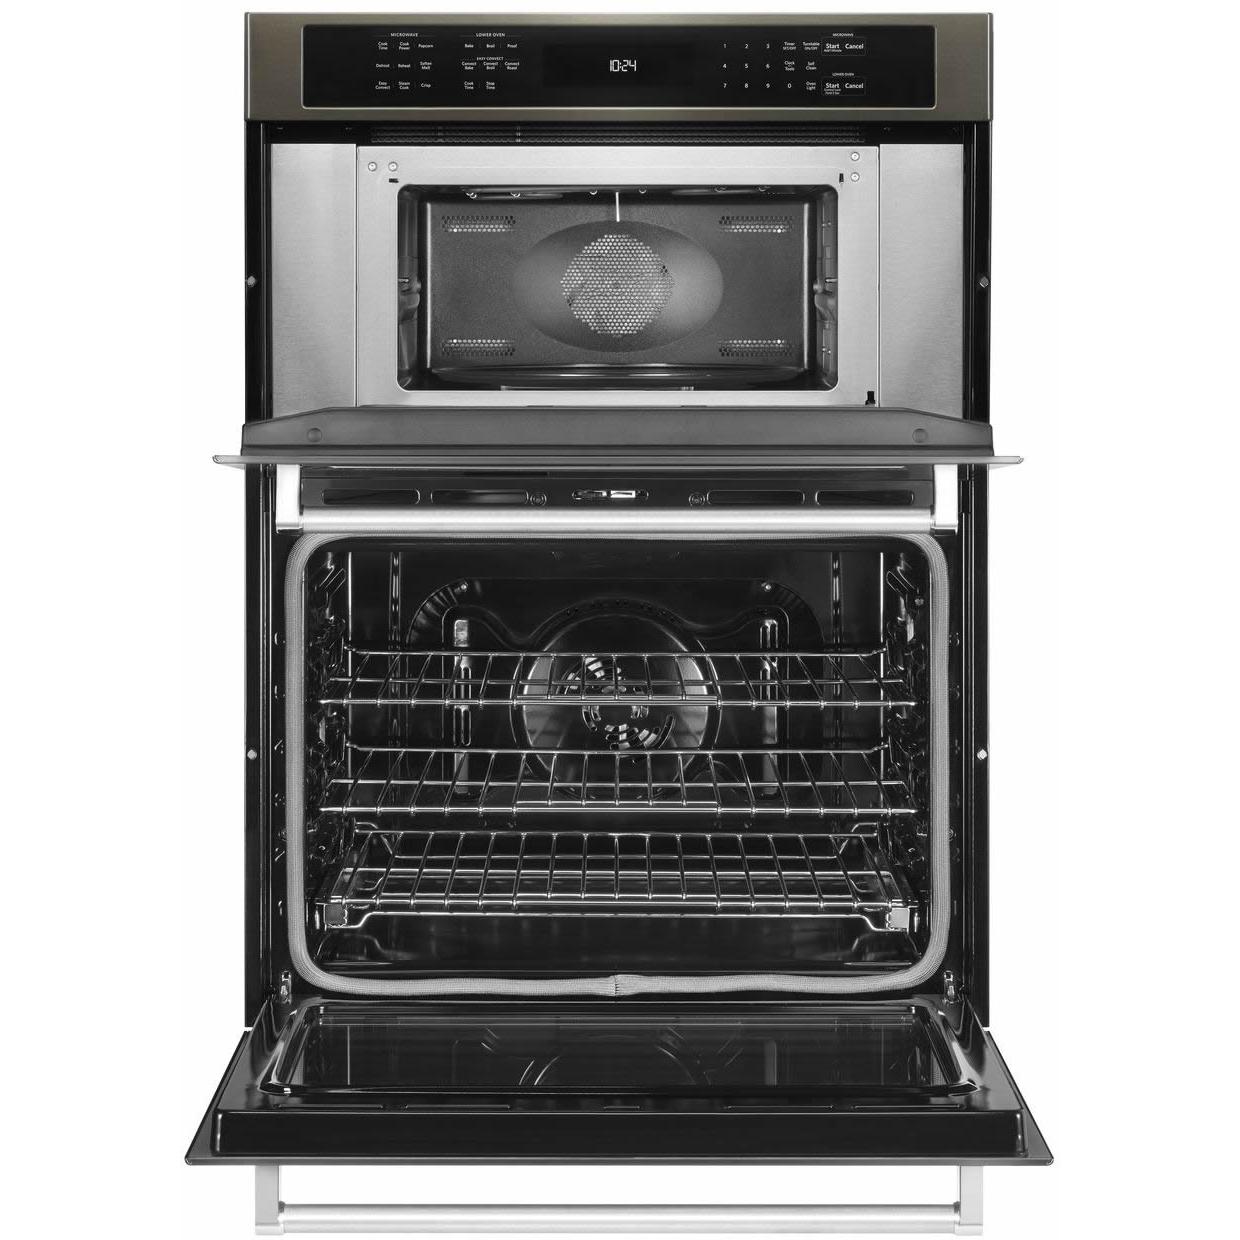 KitchenAid 30-inch, 5 cu. ft. Built-in Combination Wall Oven with Convection KOCE500EBS